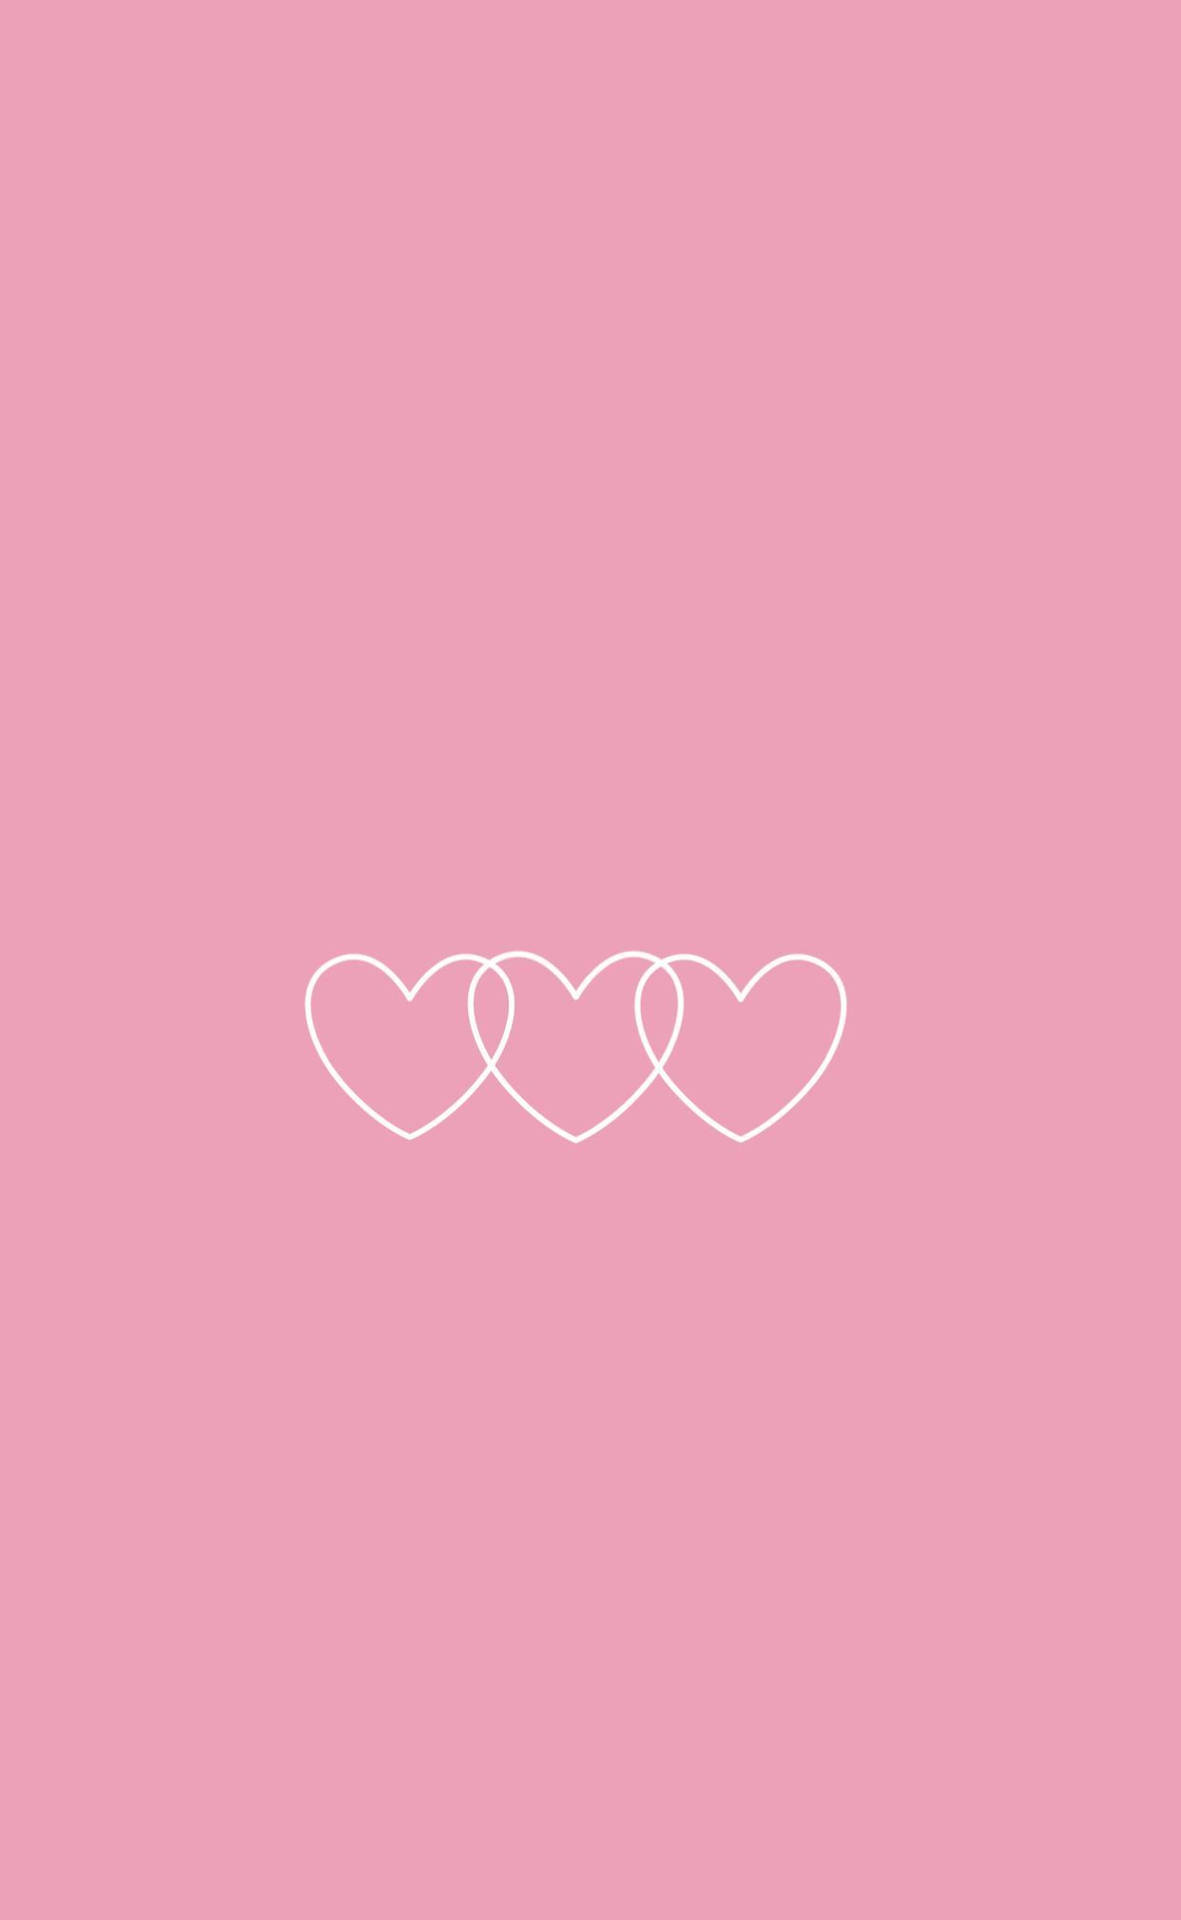 Download Three Overlapping Pastel Pink Heart Art Wallpaper | Wallpapers.com